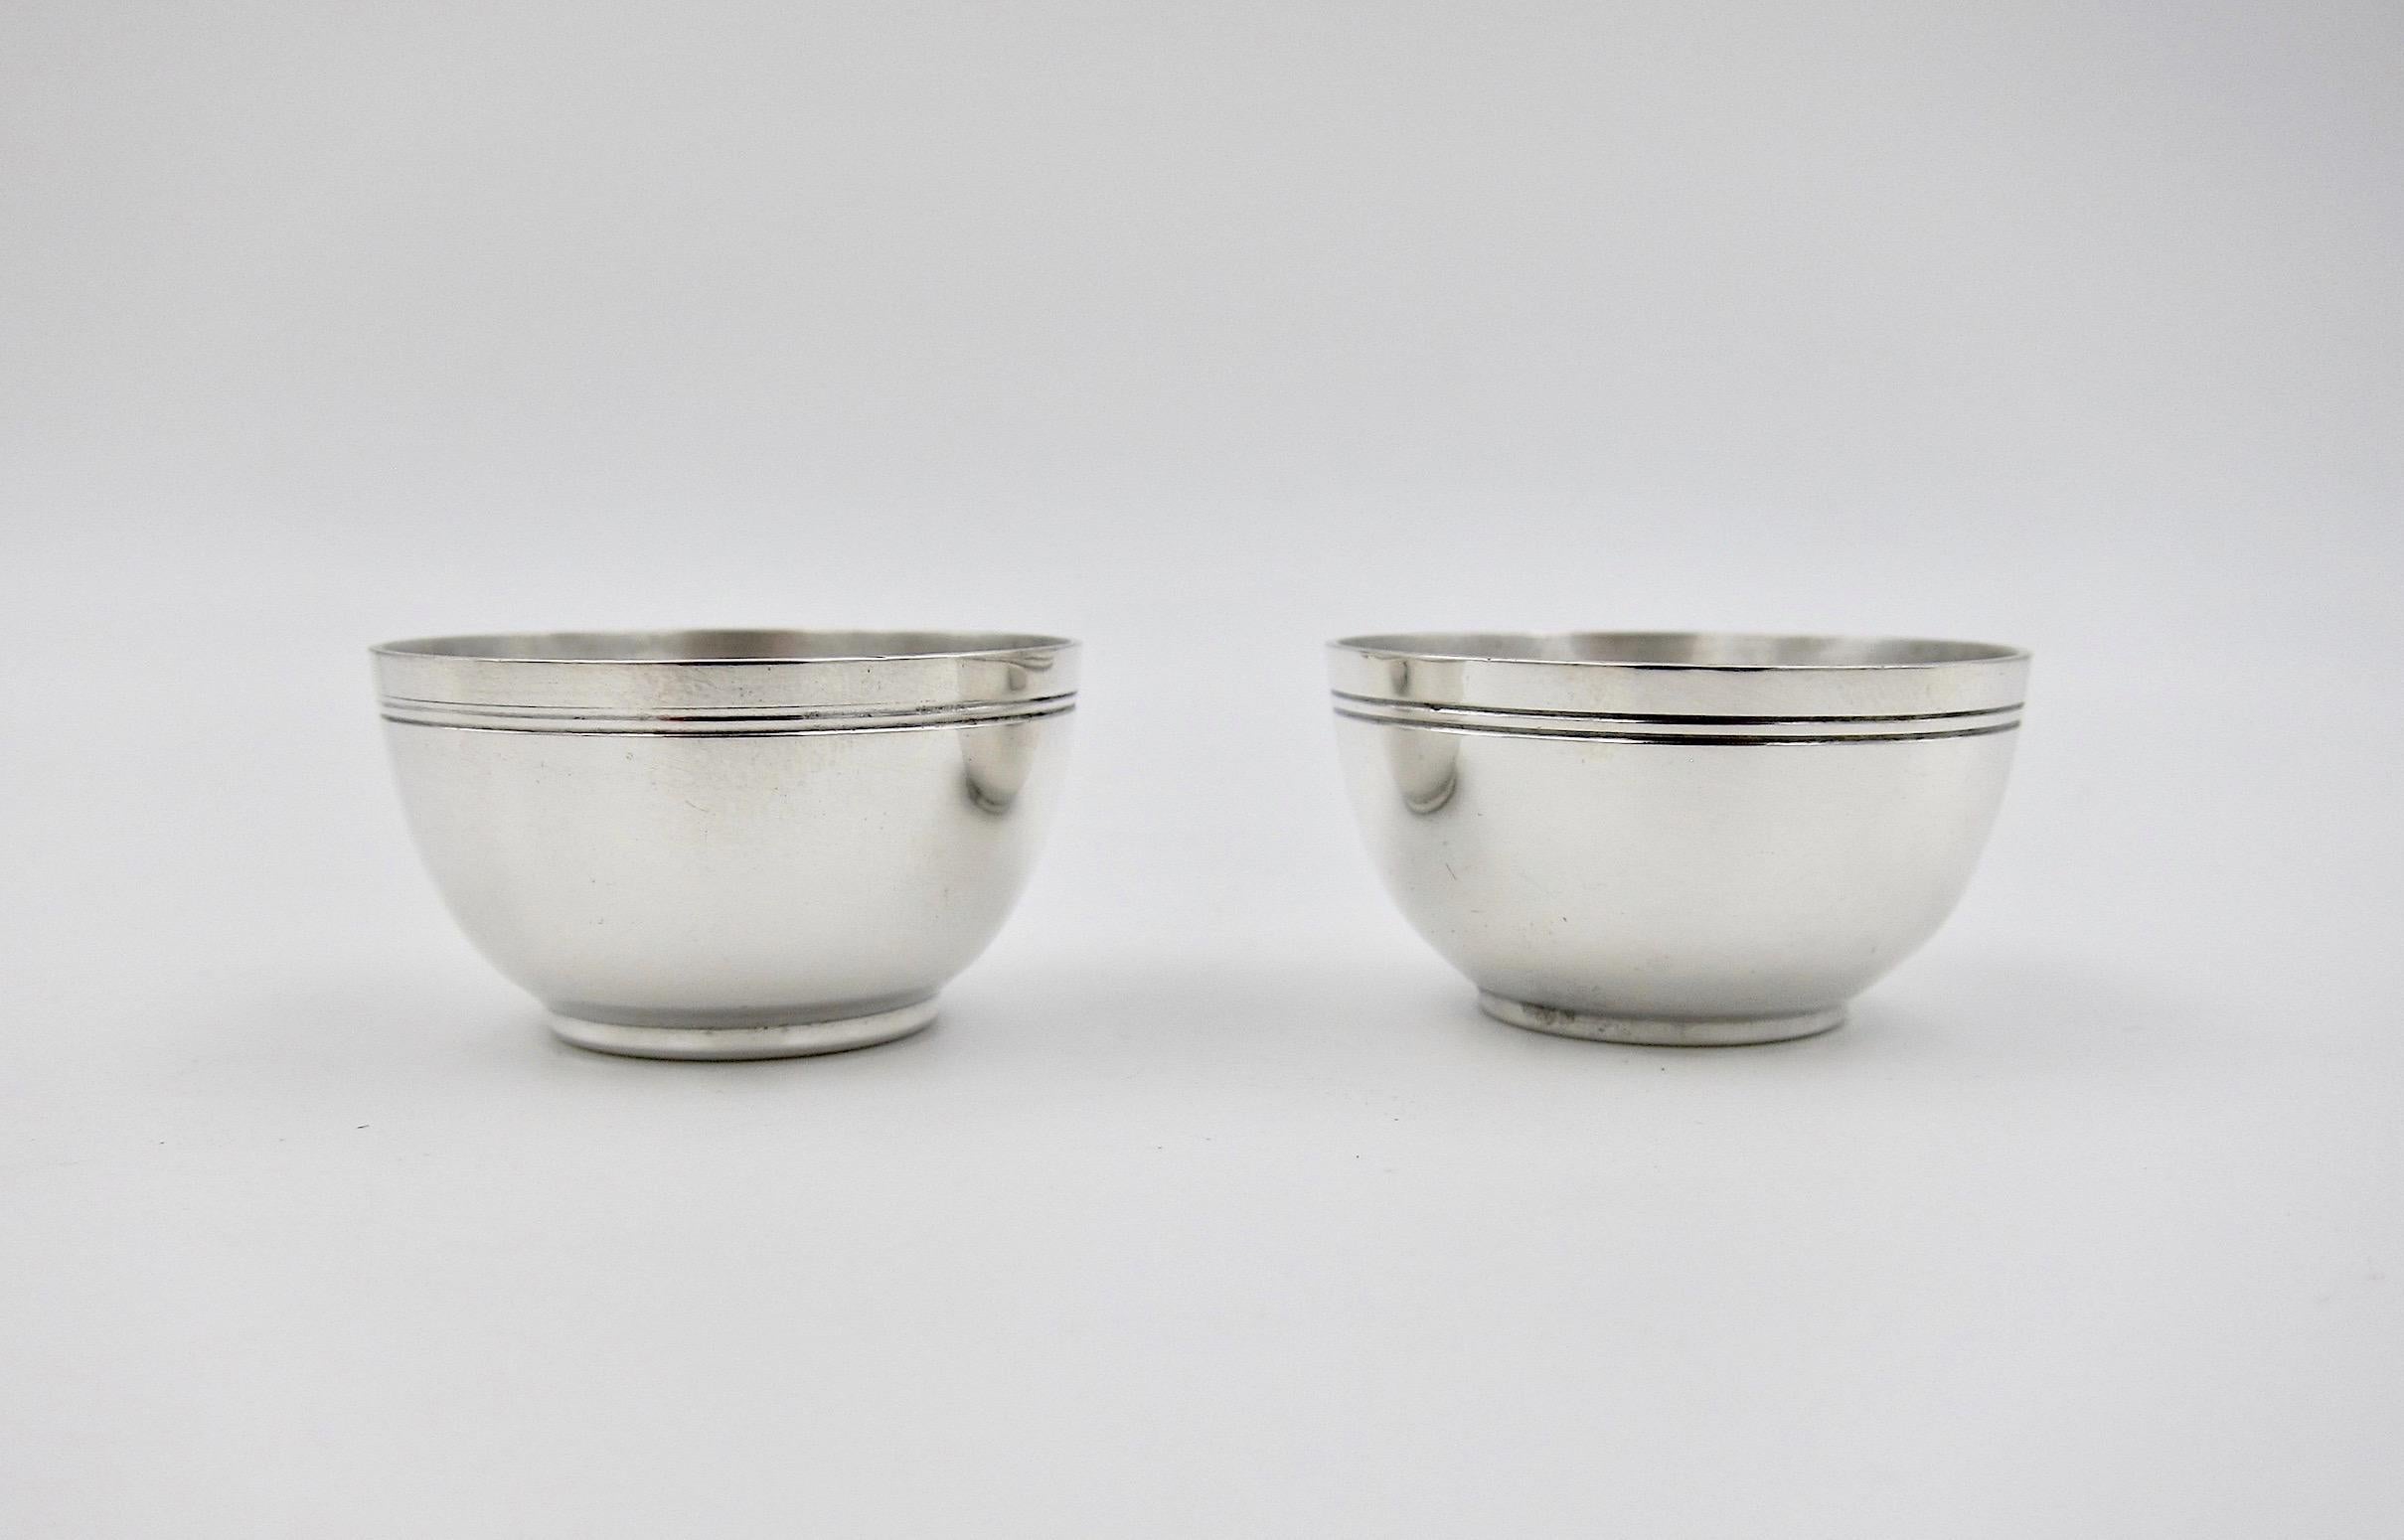 A Tiffany & Co. pair of sterling silver miniature bowls or open salt cellars. The hollowware pattern number is 20336 which date the pieces to 1924.

Very good condition, measuring .75 in. H x 1.5 in. diameter and stamped Tiffany & Co / Makers /